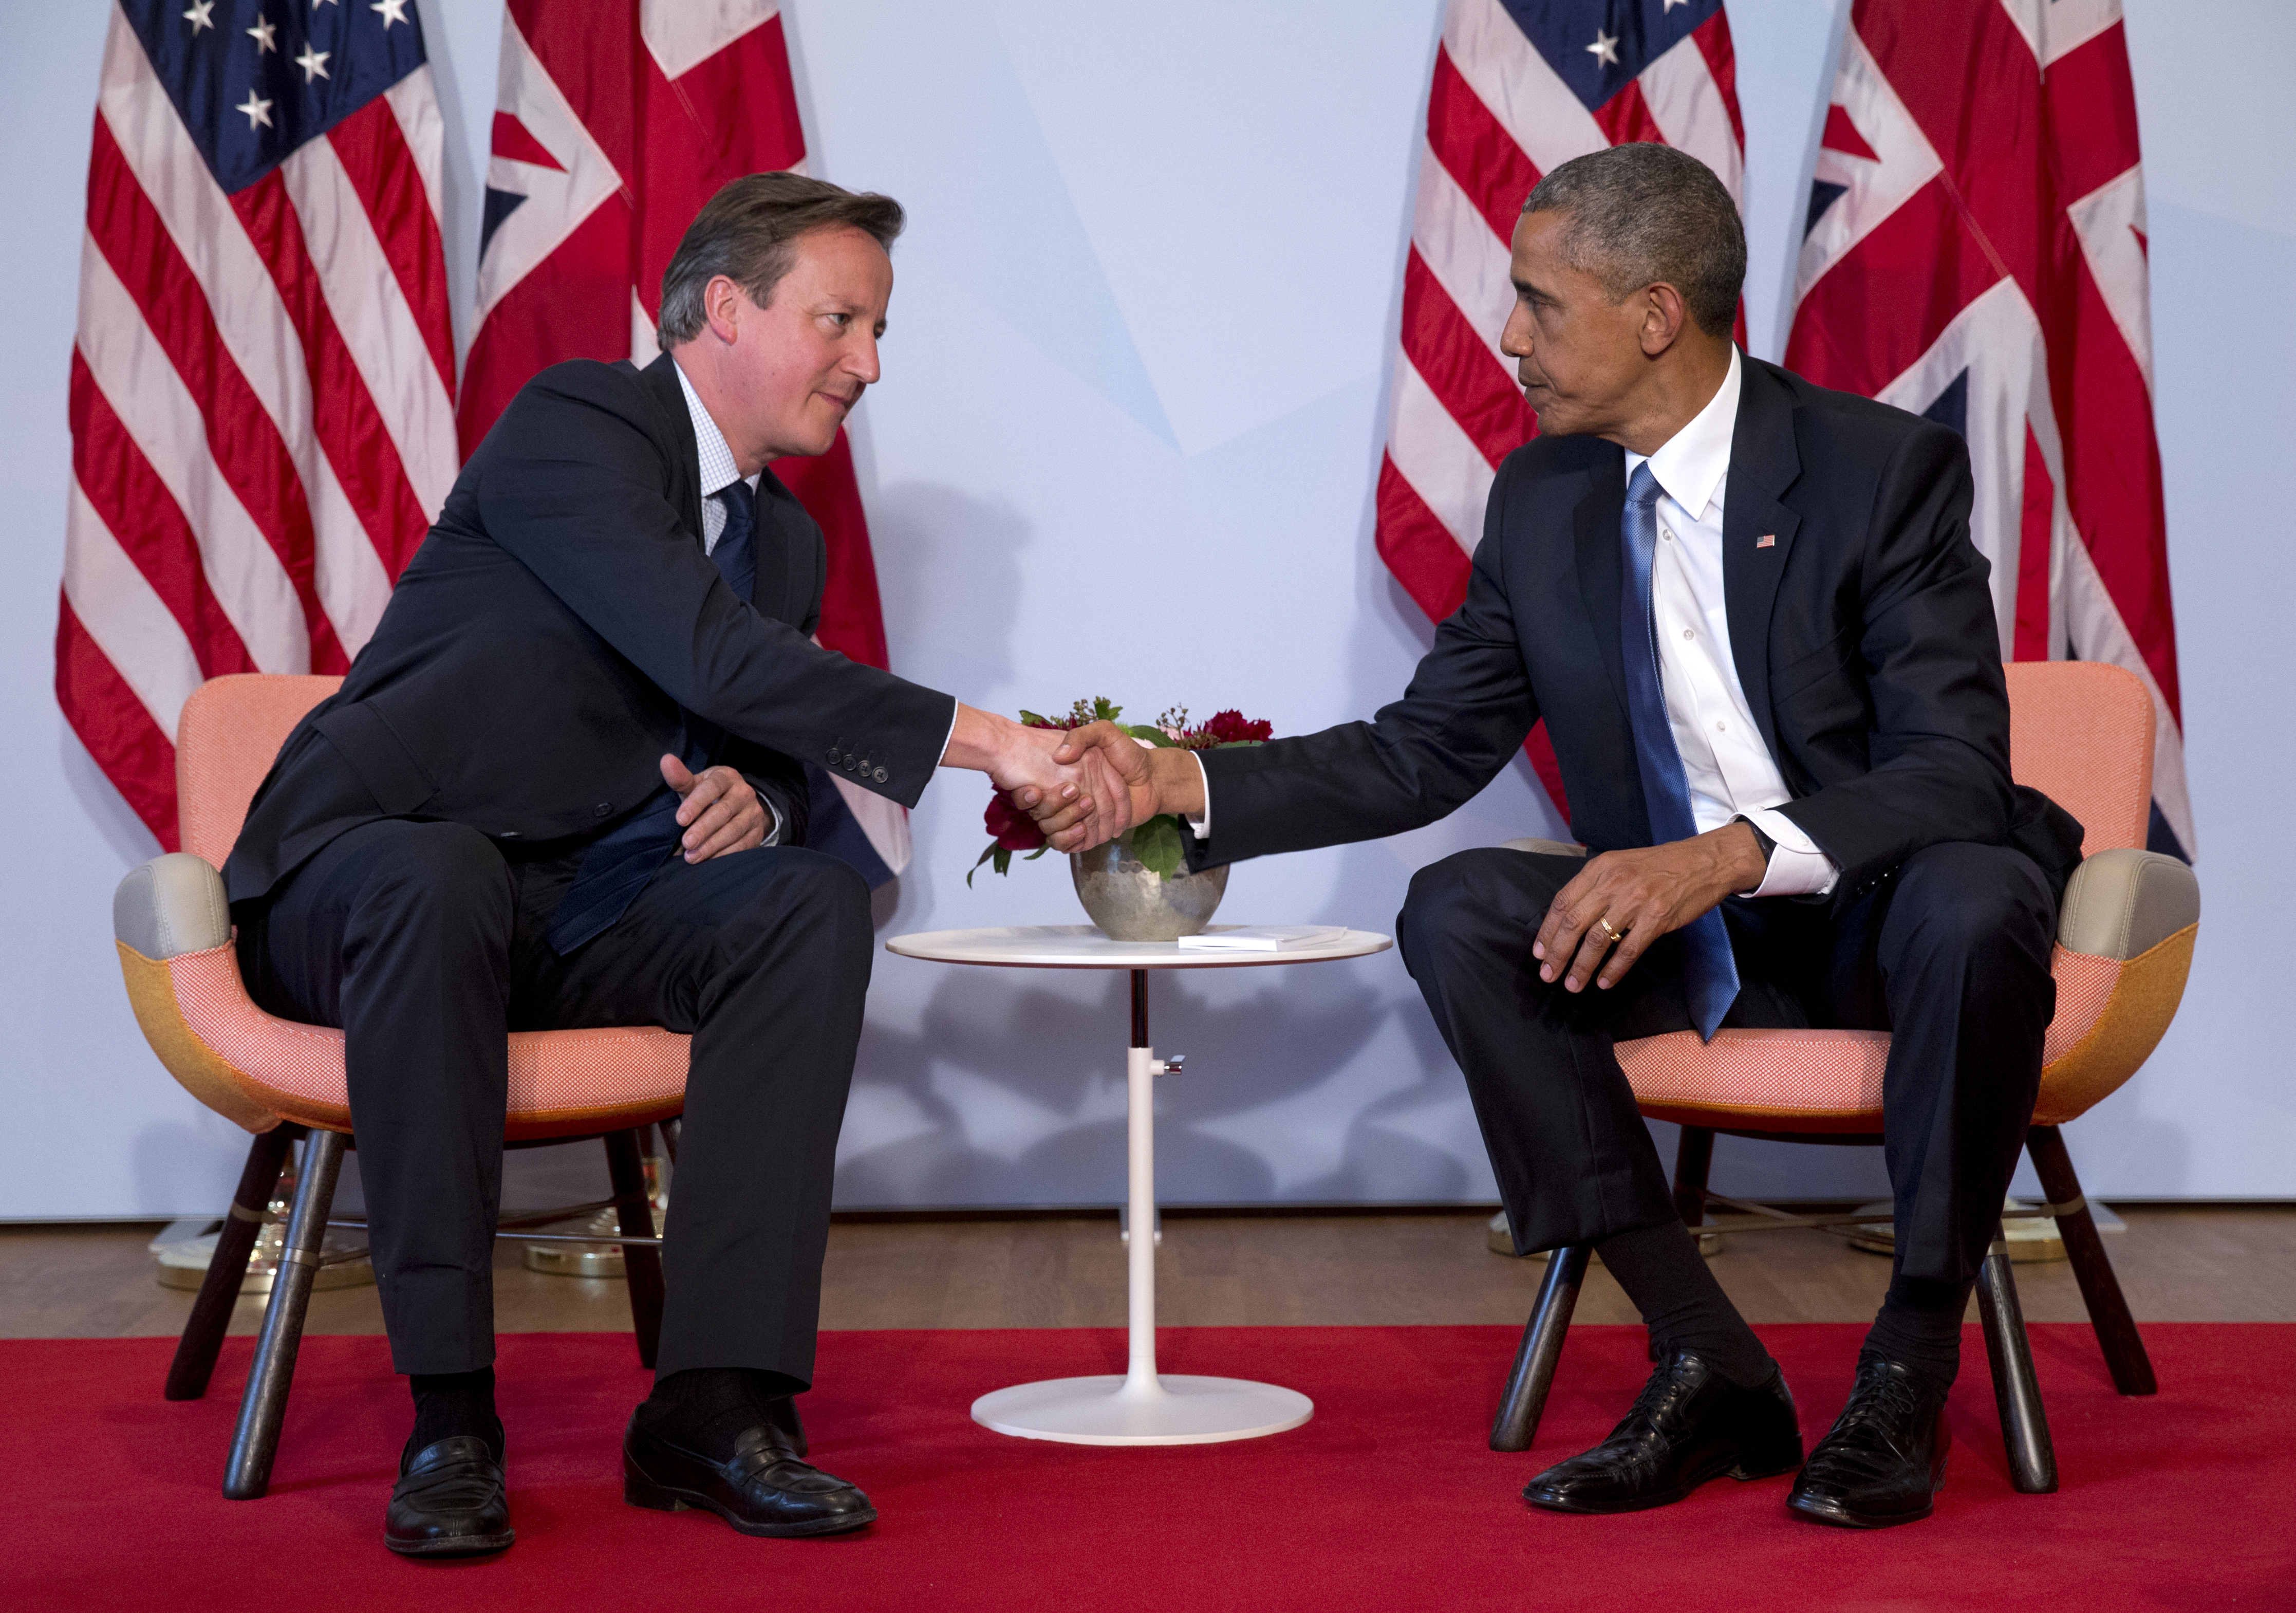 US President Barack Obama and British Prime Minister David Cameron shake hands during a bilateral meeting during the G-7 summit in Schloss Elmau hotel near Garmisch-Partenkirchen, southern Germany, June 7, 2015. (Carolyn Kaster—AP)